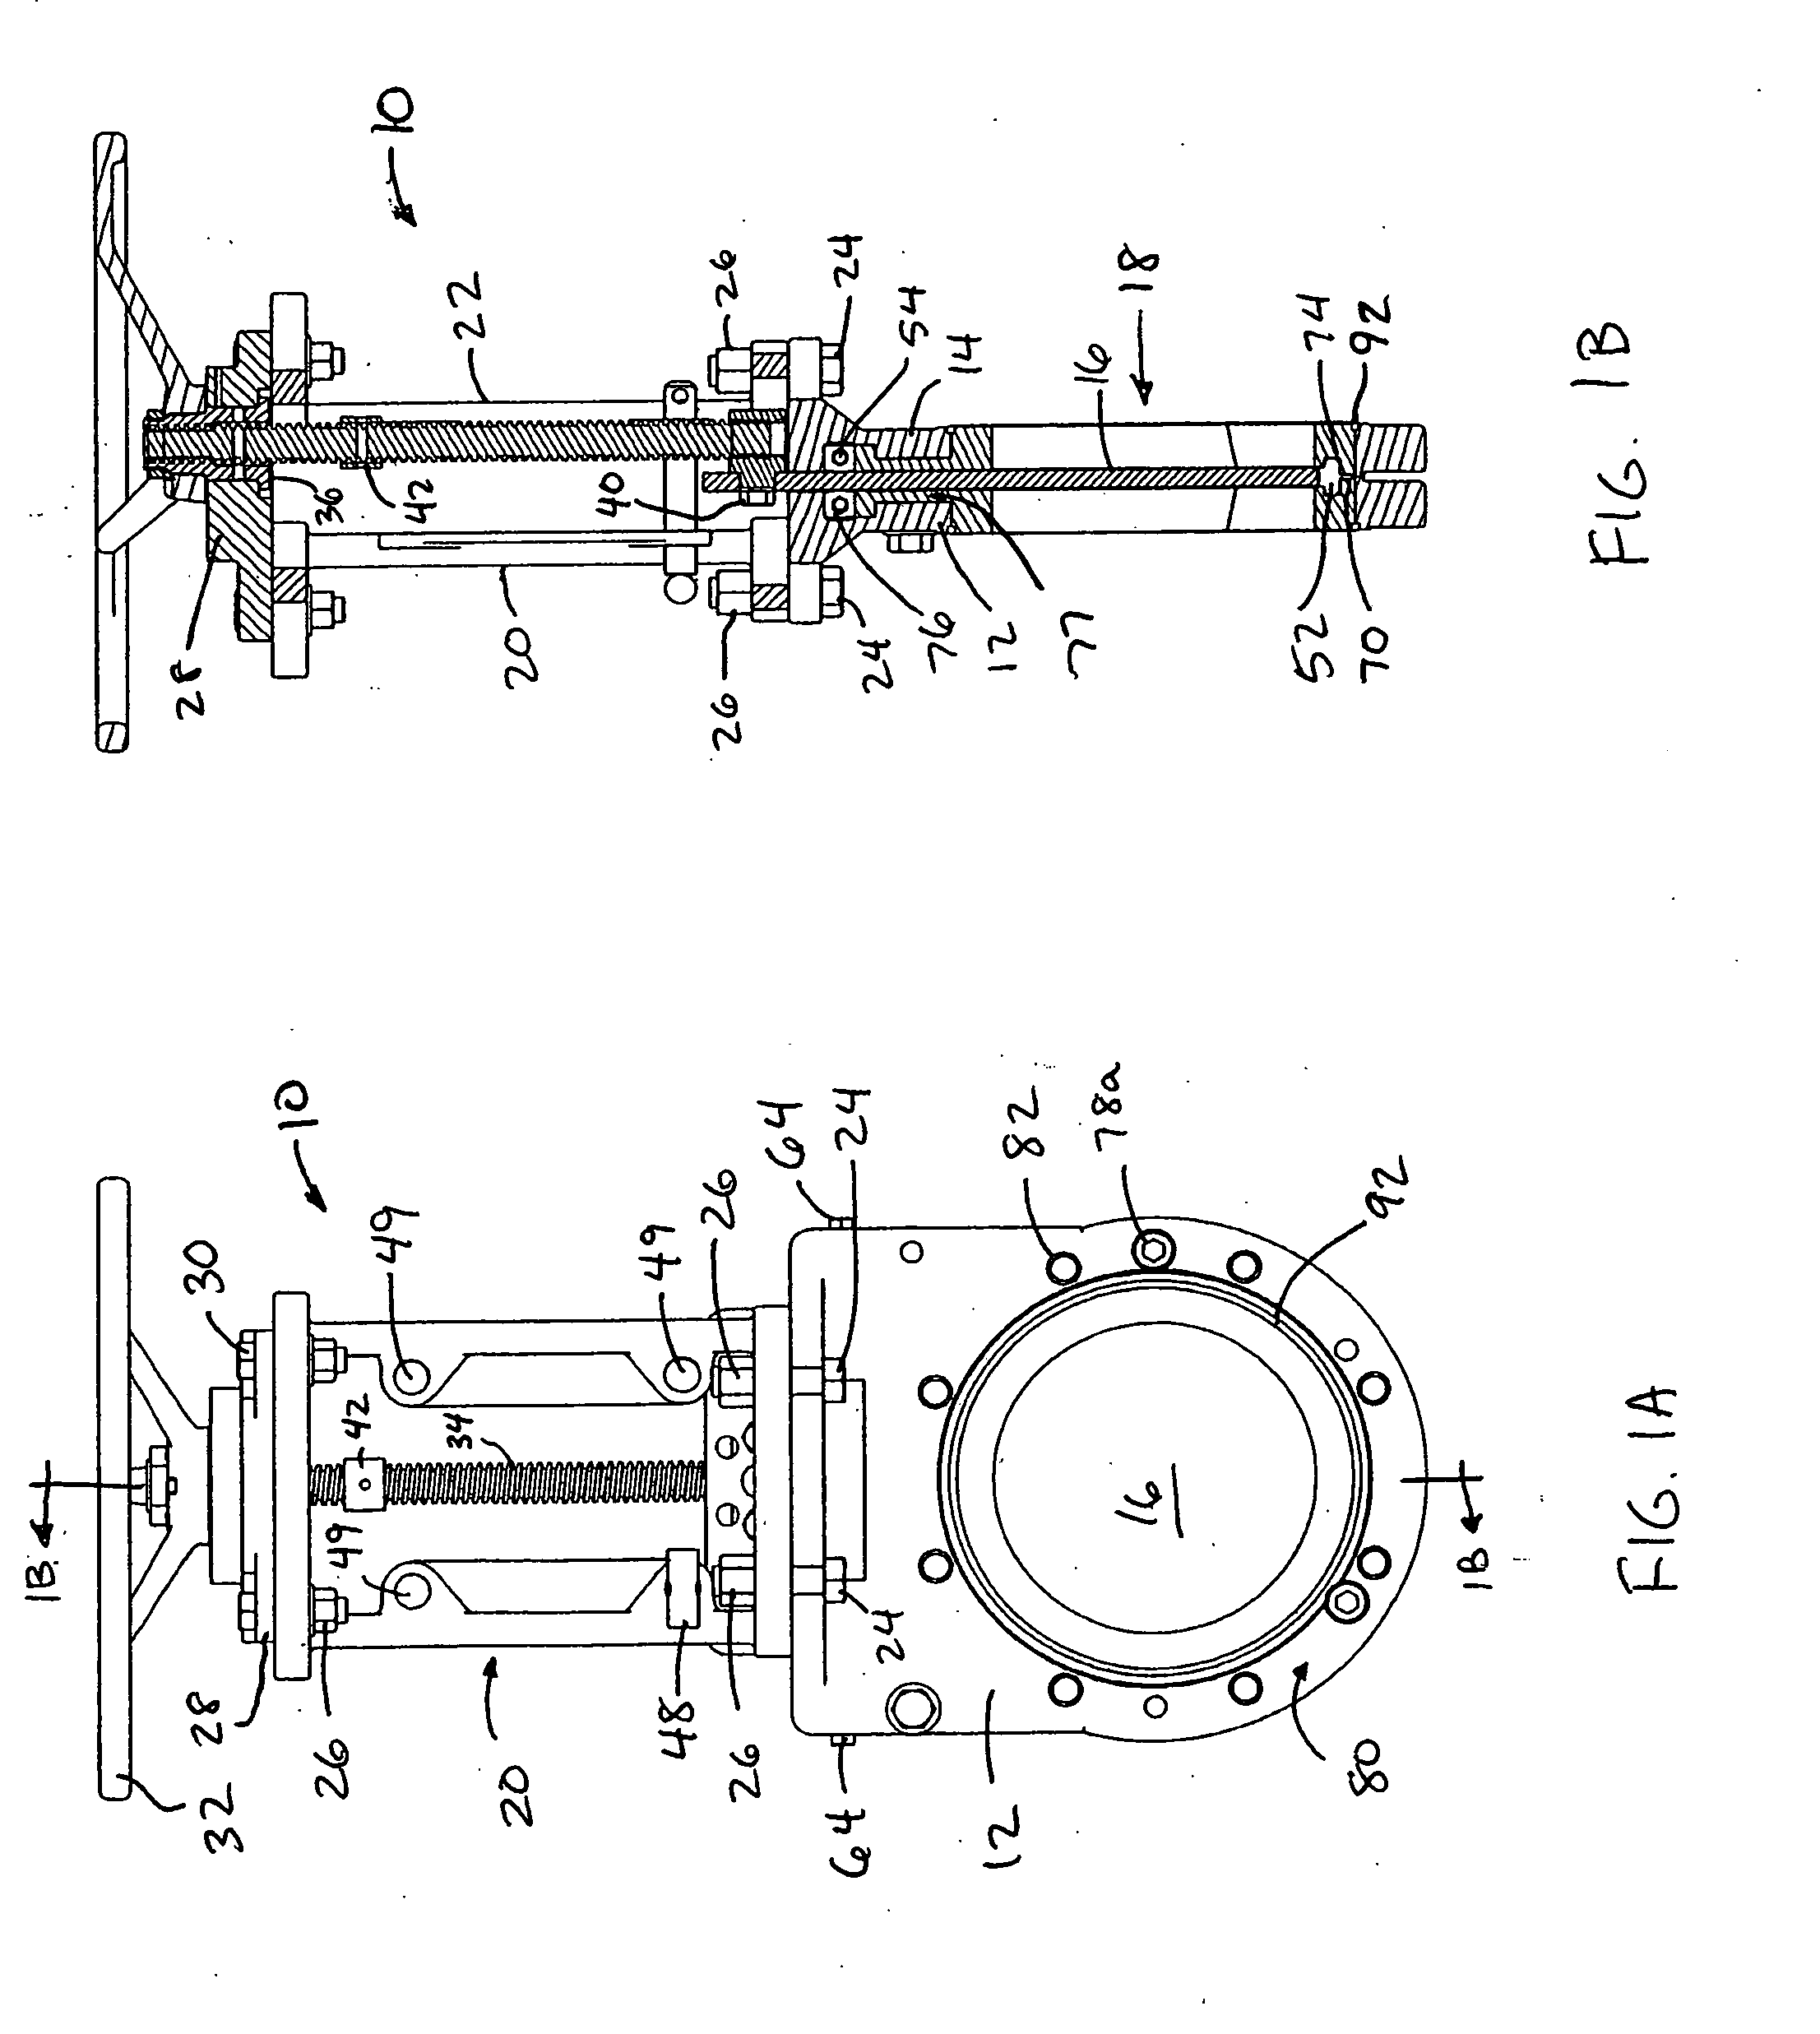 Knife gate valve with multi-piece elastomer liner and/or o-rings at flange interface